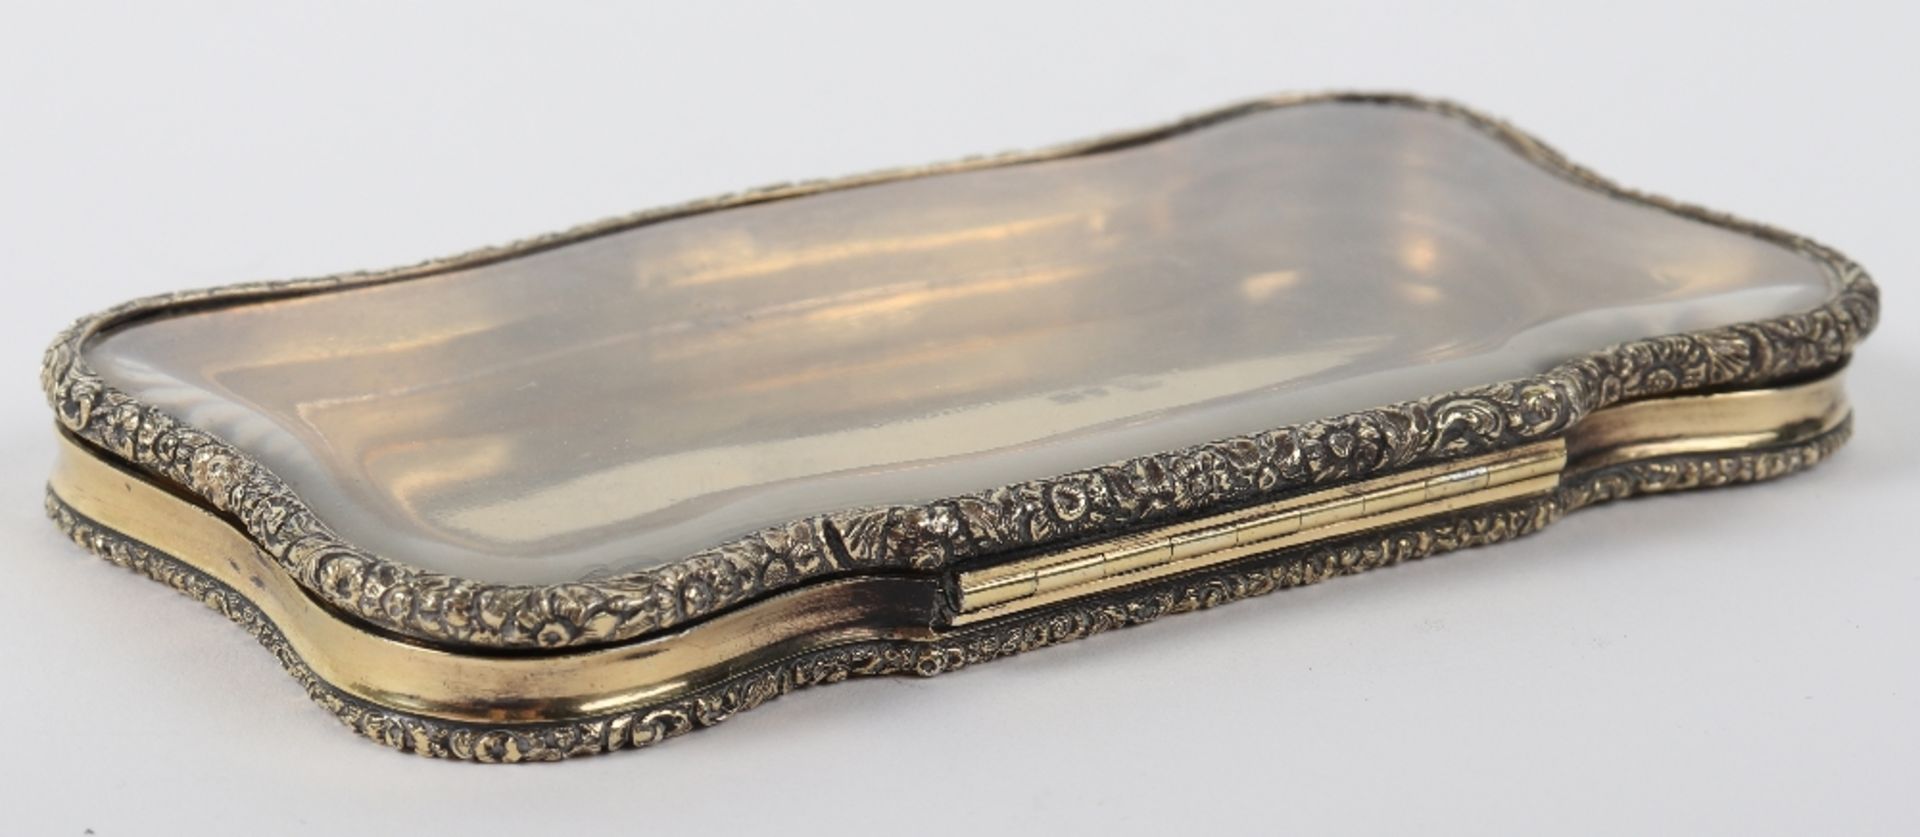 A William IV silver gilt and glass snuff box, Charles Rawlings & William Summers, London 1833 - Bild 3 aus 10